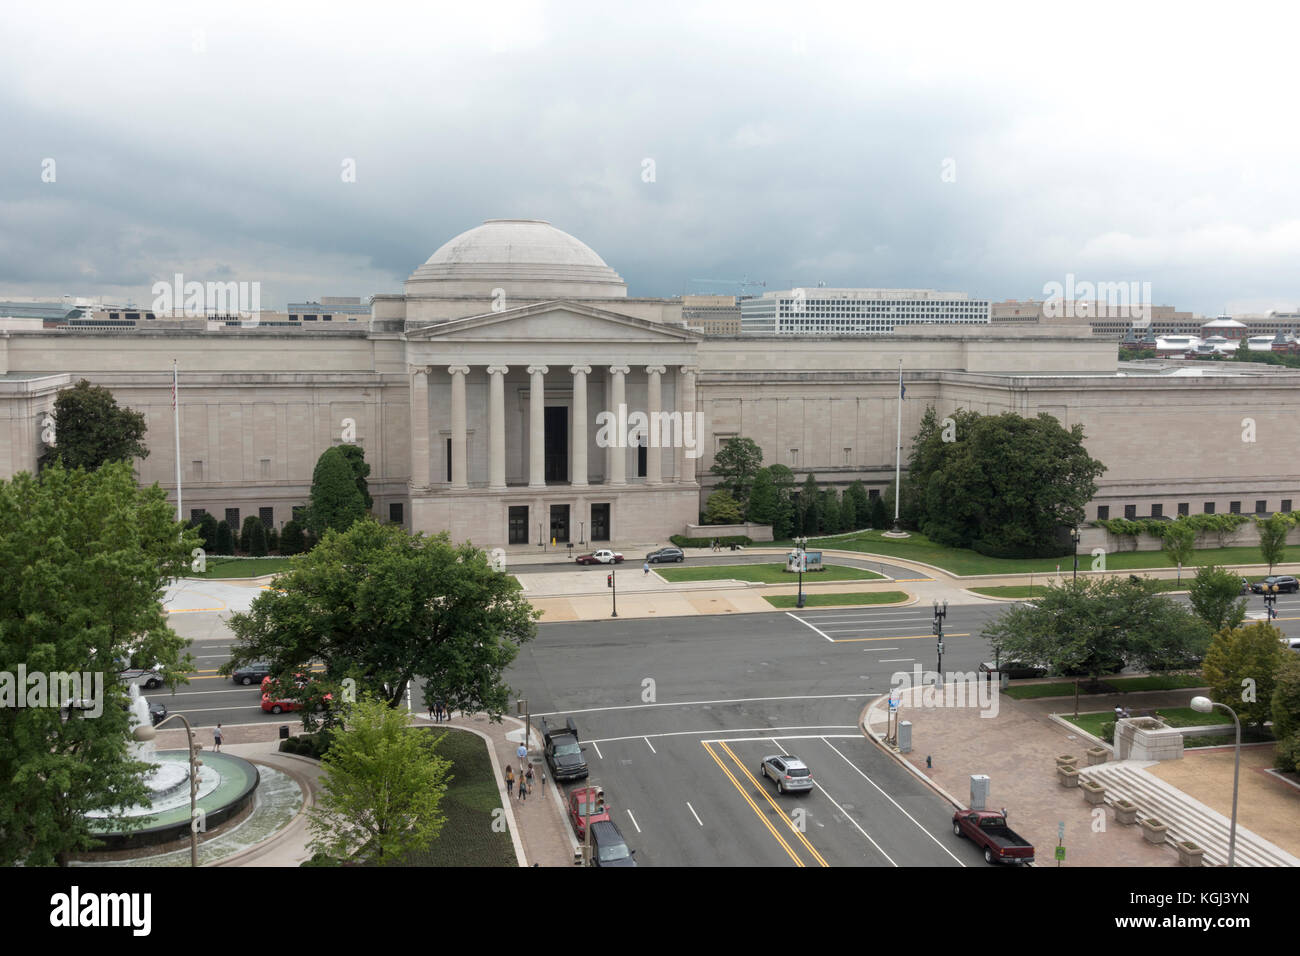 National Gallery of Art viewed from the roof of the Newseum museum,  Washington DC, United States. Stock Photo